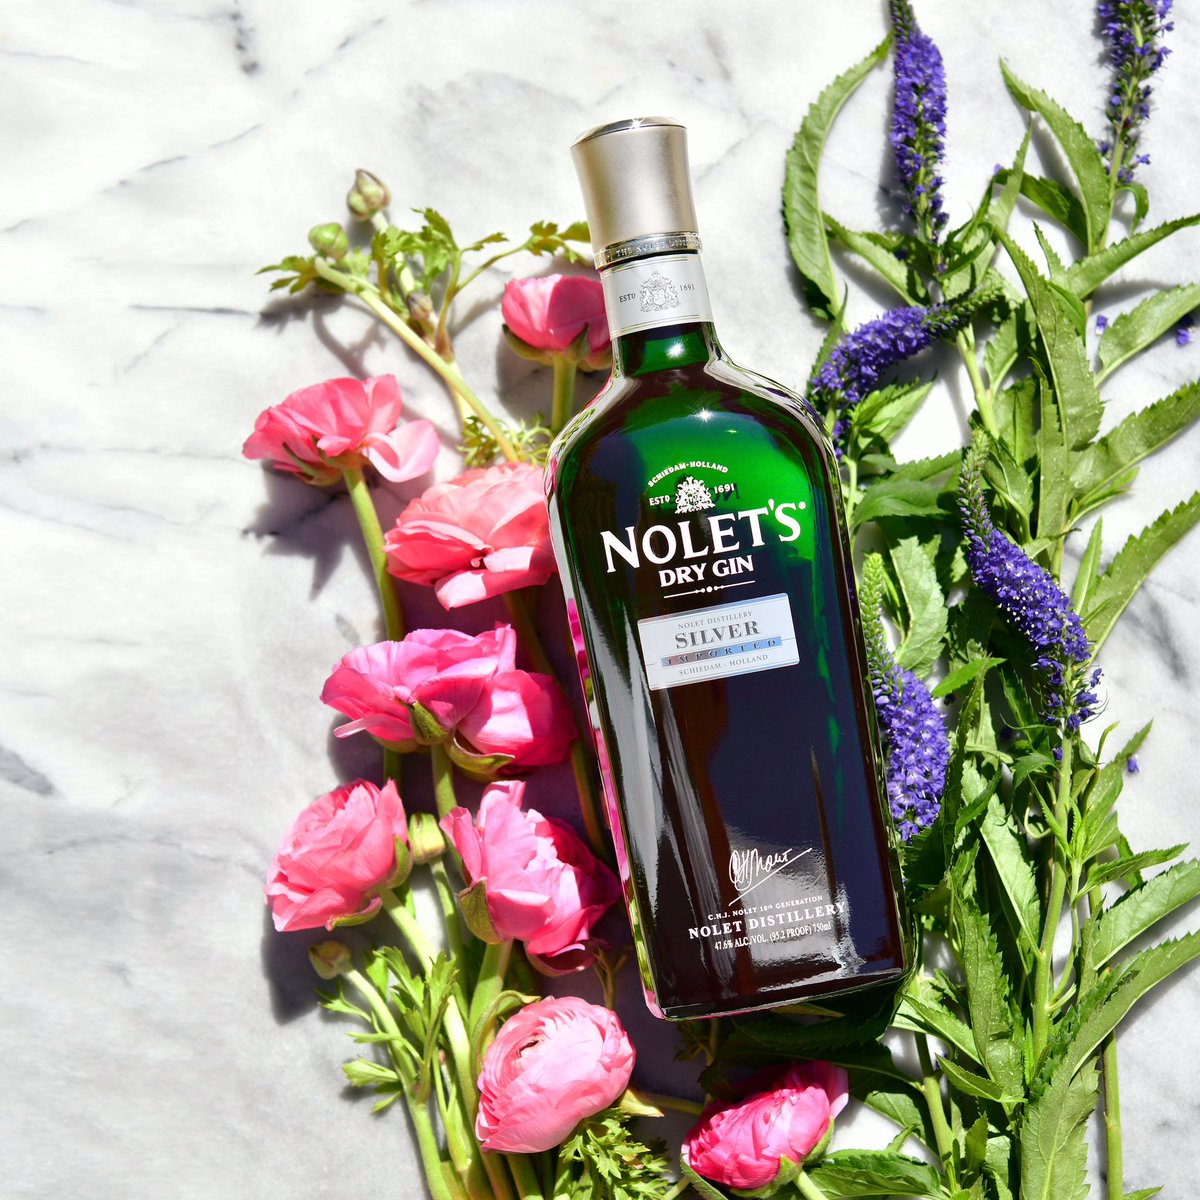 NOLET’S Silver is like Spring in a bottle. The beautiful fruit and floral-forward modern gin has so much juicy flavor without carbs, sugar or gluten and only 117 calories per 1.5 oz serve. Enjoy the bloom! Locate bottles on our website #NOLETS #Botanical #gin